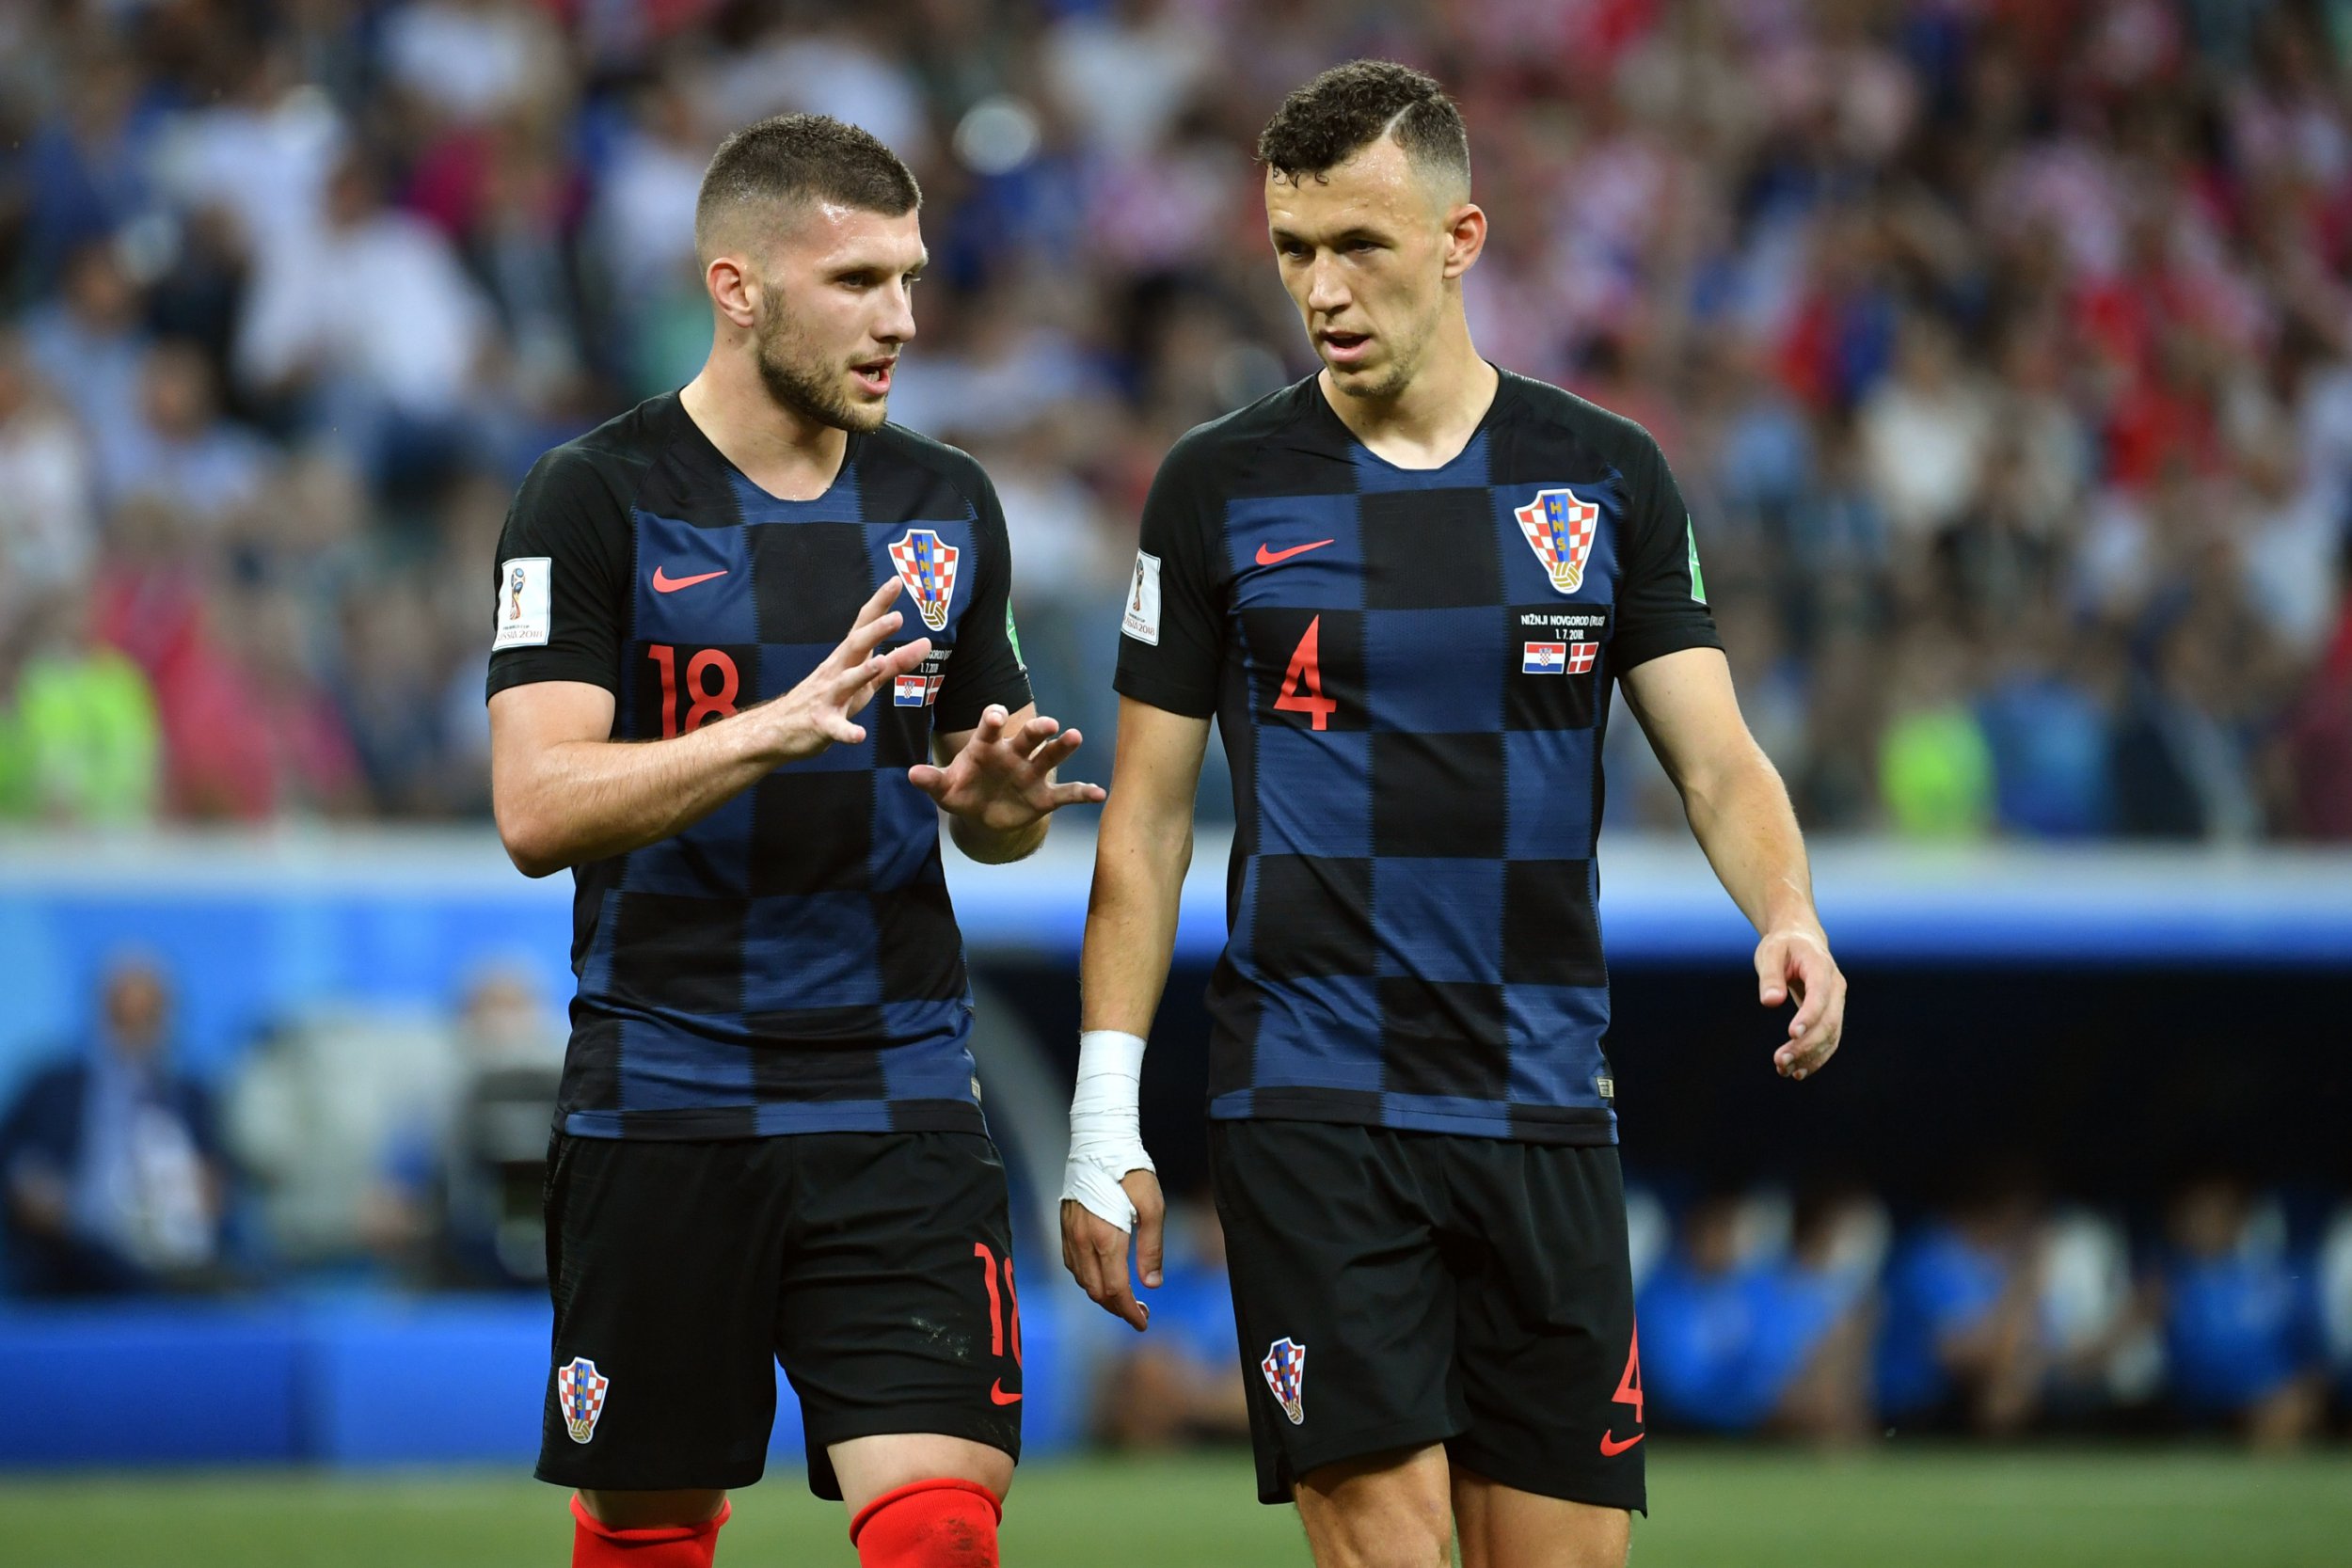 Manchester United target £92million transfer deal for Ivan Perisic and Ante Rebic